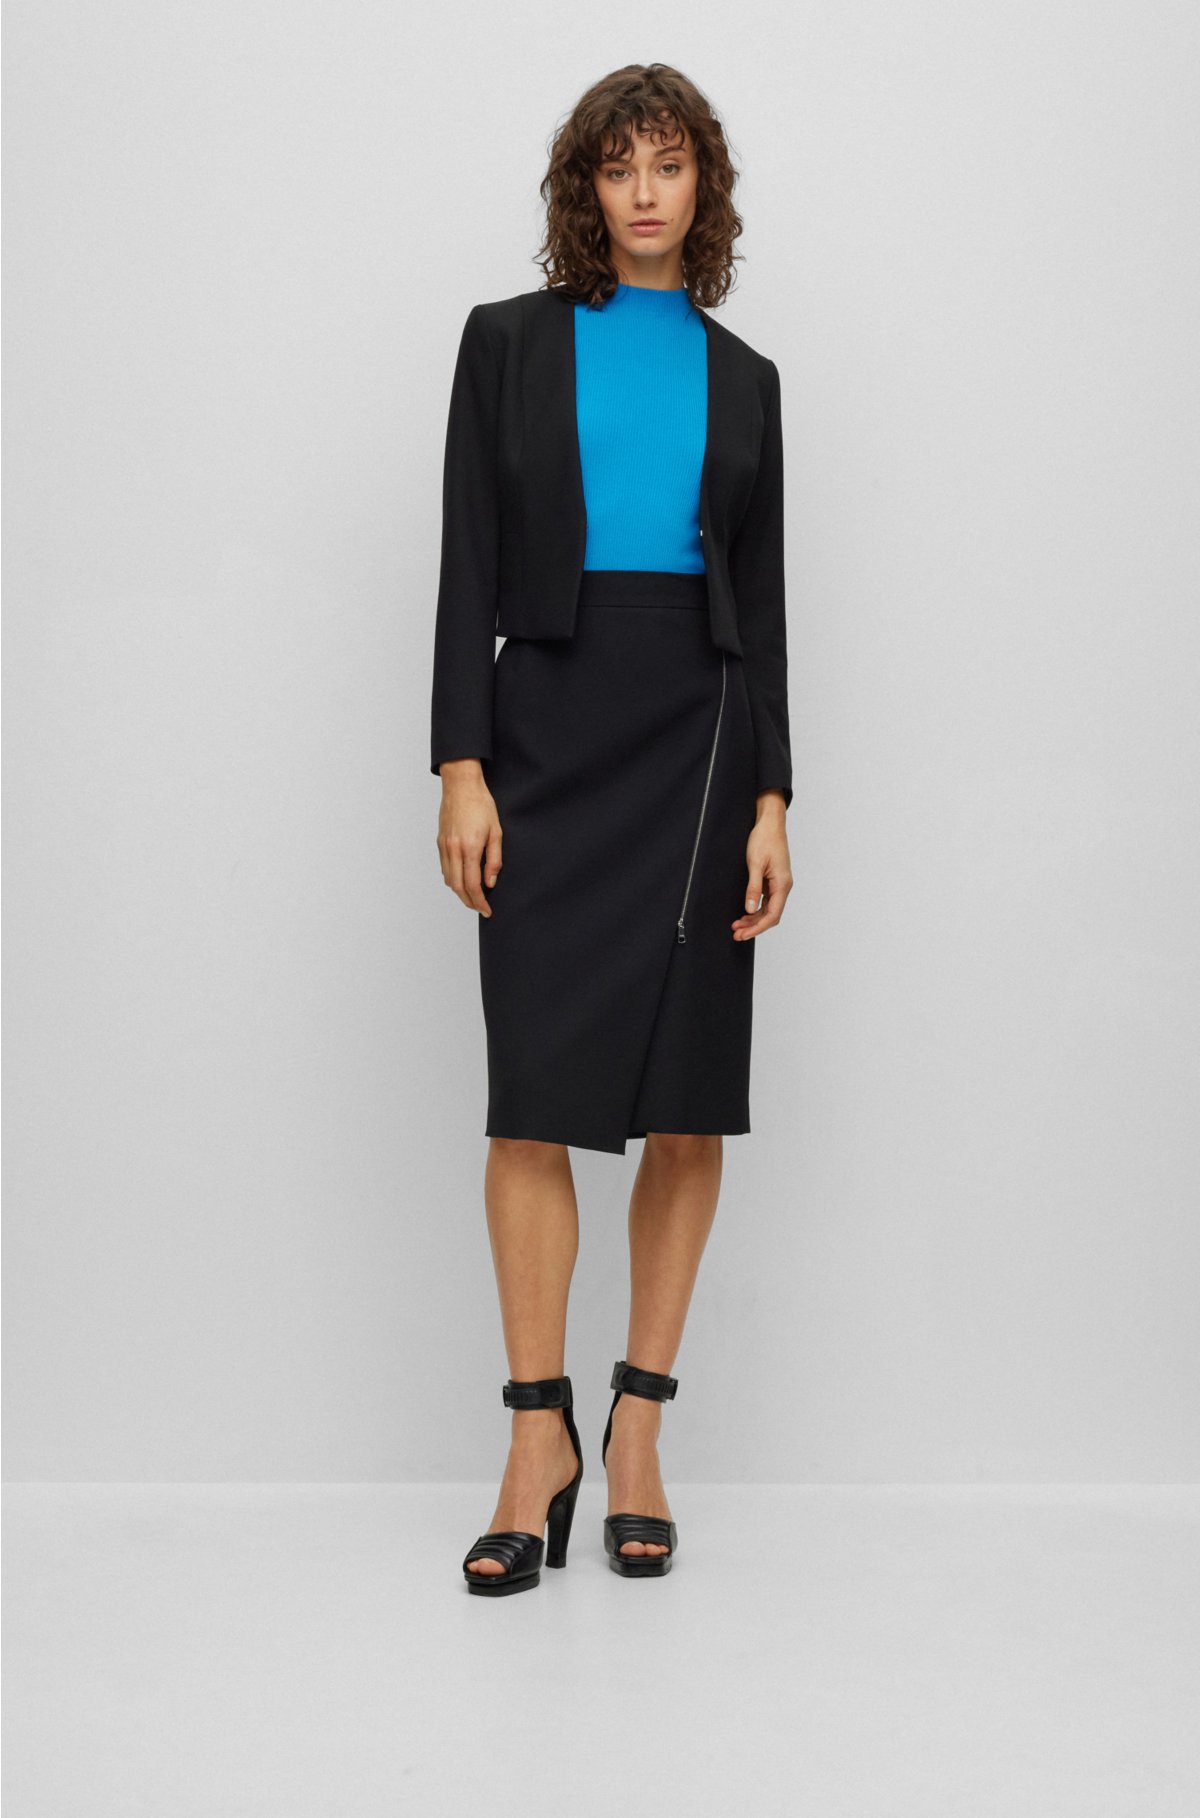 BOSS - Pencil skirt in stretch fabric with front slit